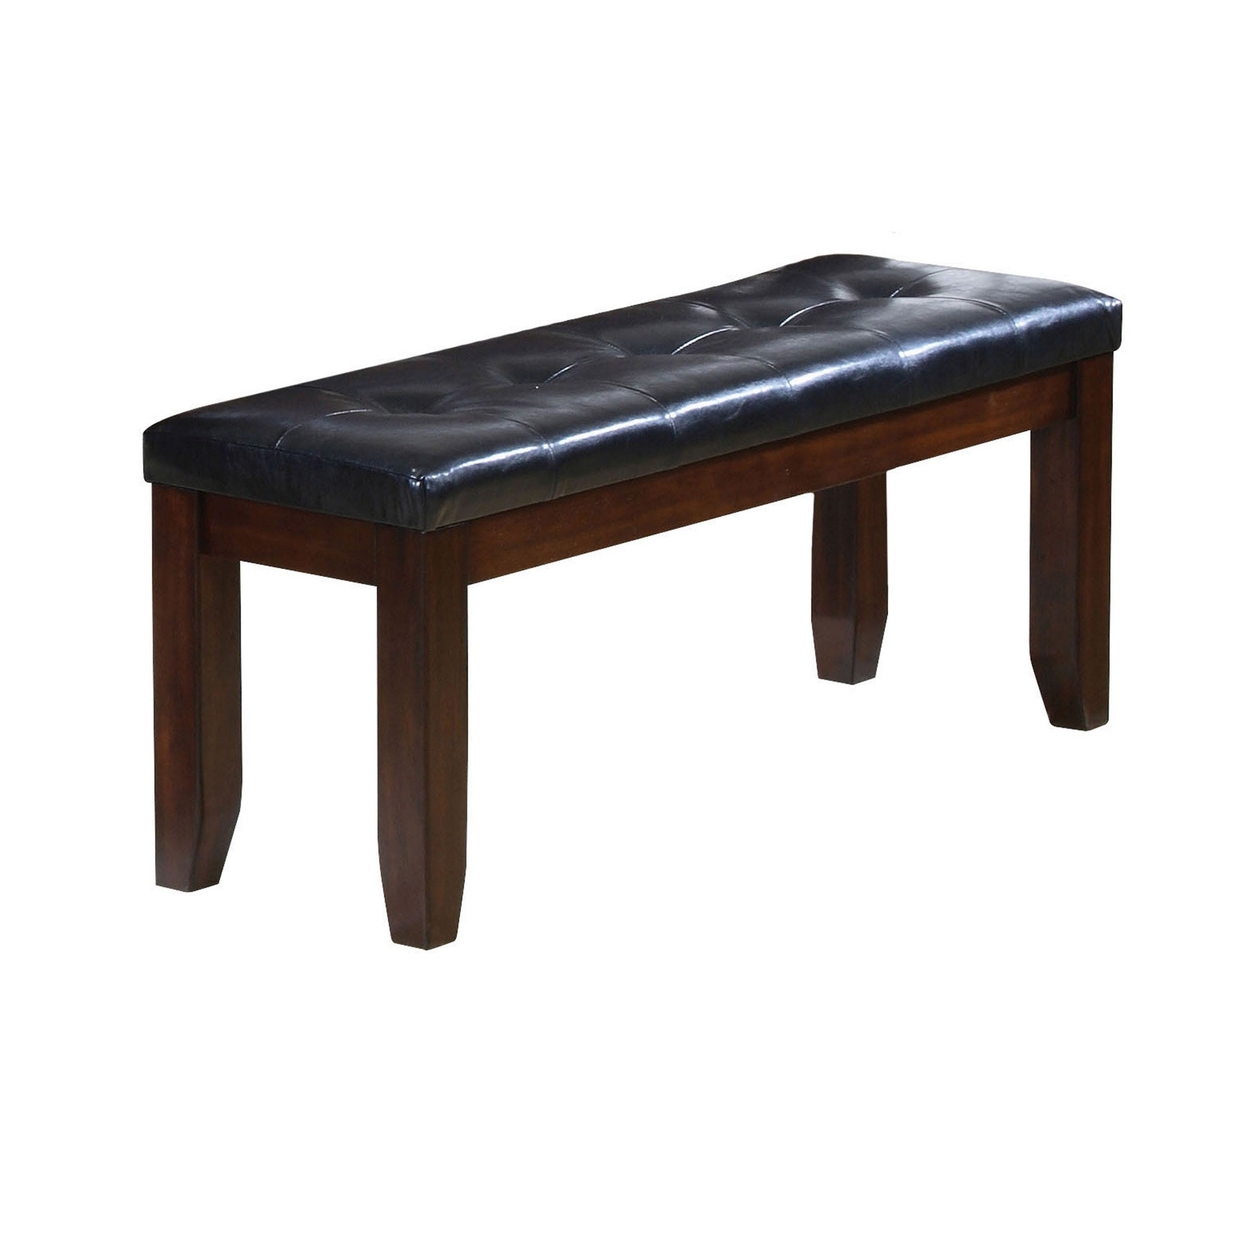 Leather Upholstered Wooden Bench With Tufted Seat, Espresso Brown & Black- Saltoro Sherpi